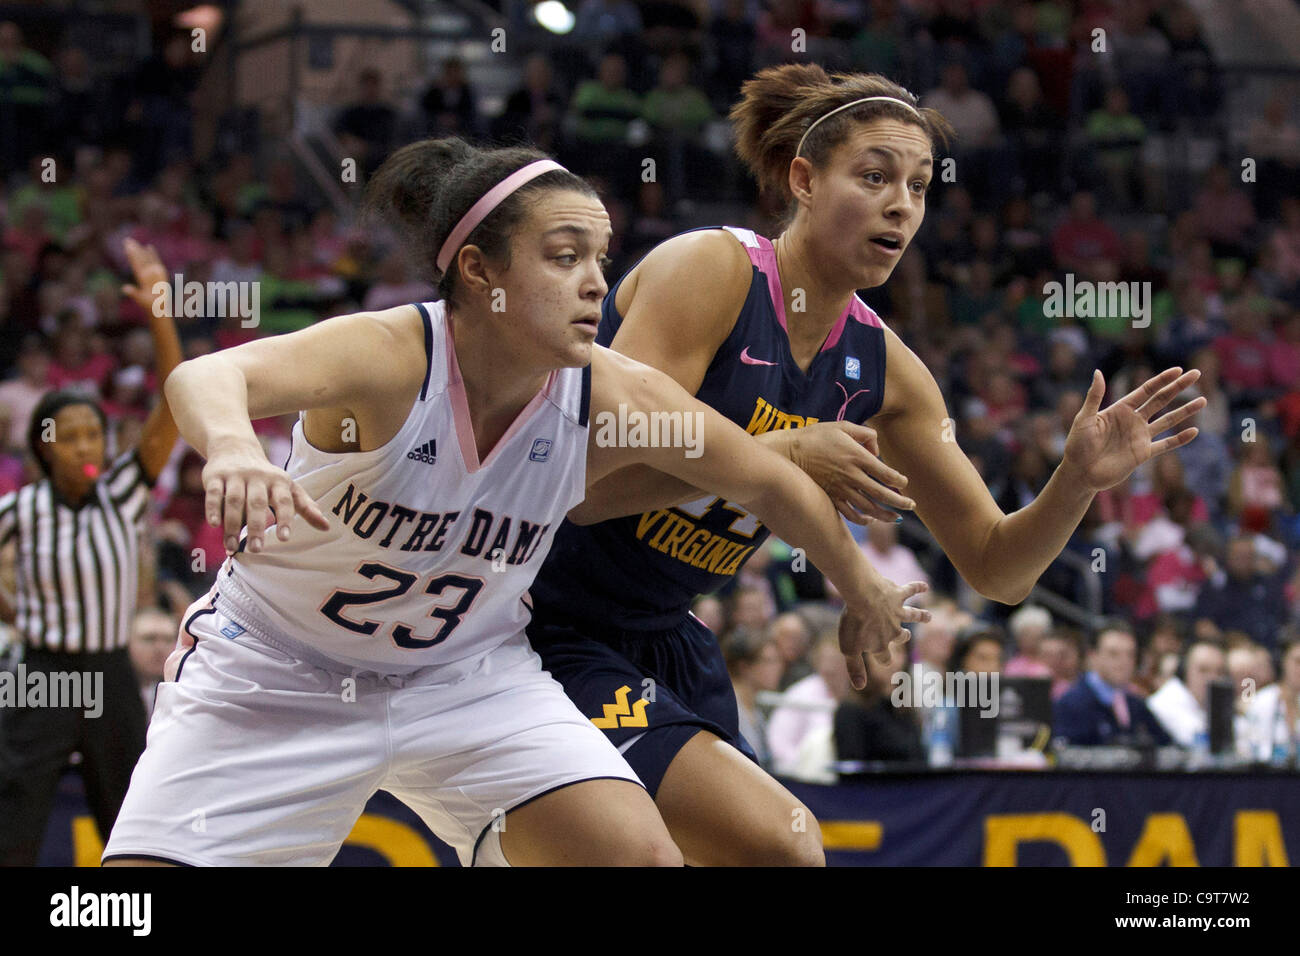 Feb. 12, 2012 - South Bend, Indiana, U.S - Notre Dame guard Kayla McBride (#23) and West Virginia forward Jess Harlee (#14) battle for position in first half action of NCAA Women's basketball game between West Virginia and Notre Dame.  The West Virginia Mountaineers upset the Notre Dame Fighting Iri Stock Photo